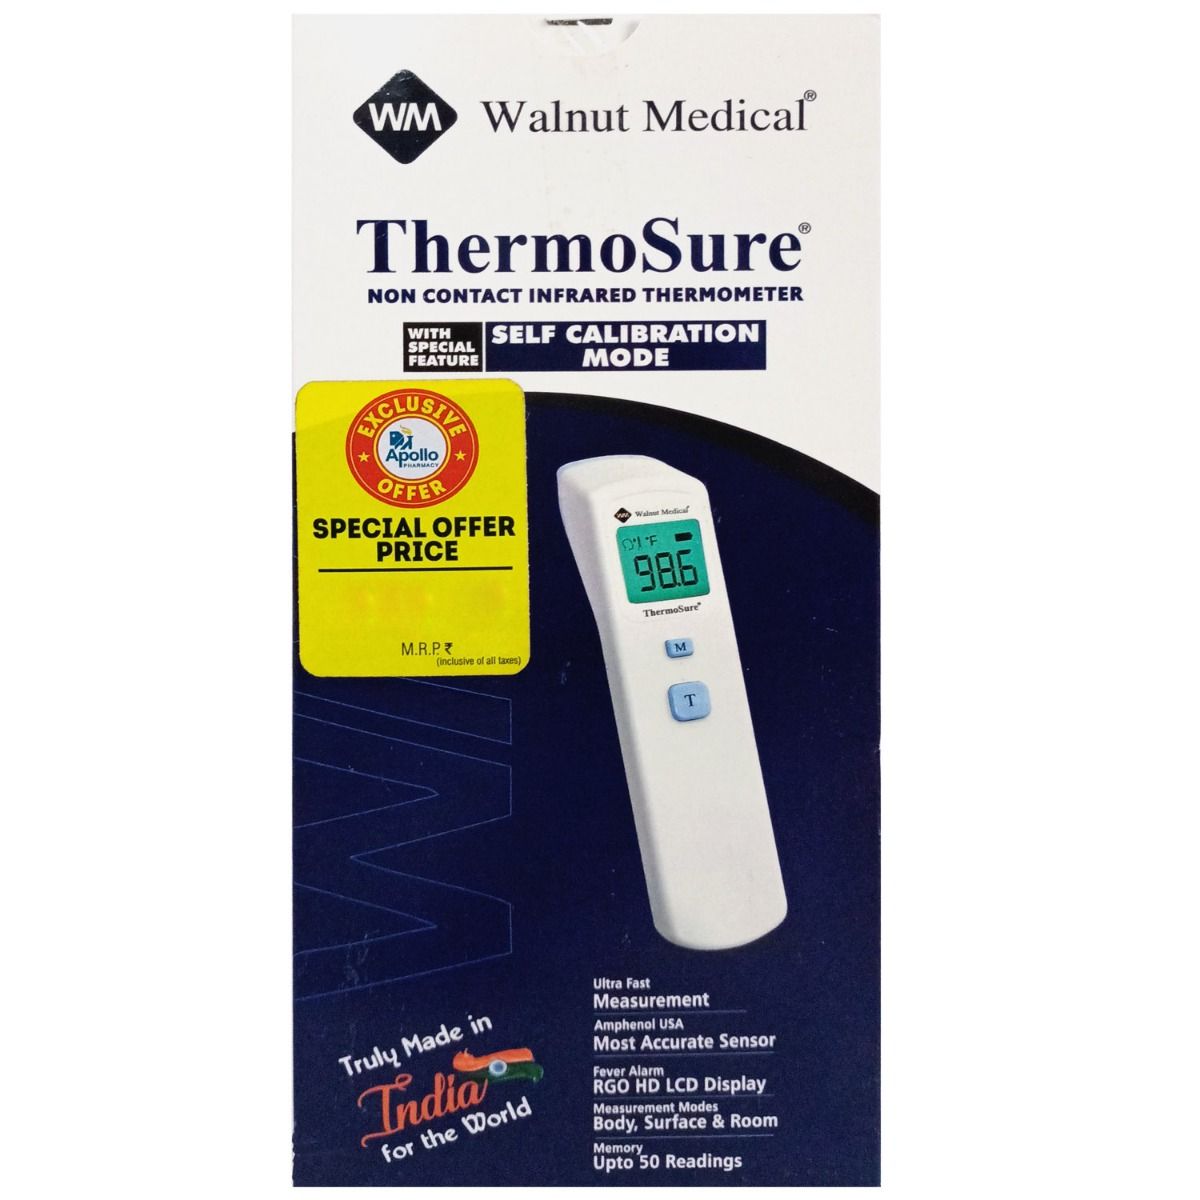 Buy Apollo Life Thermosure Non Contact Infrared Thermometer TS-03, 1 Count Online